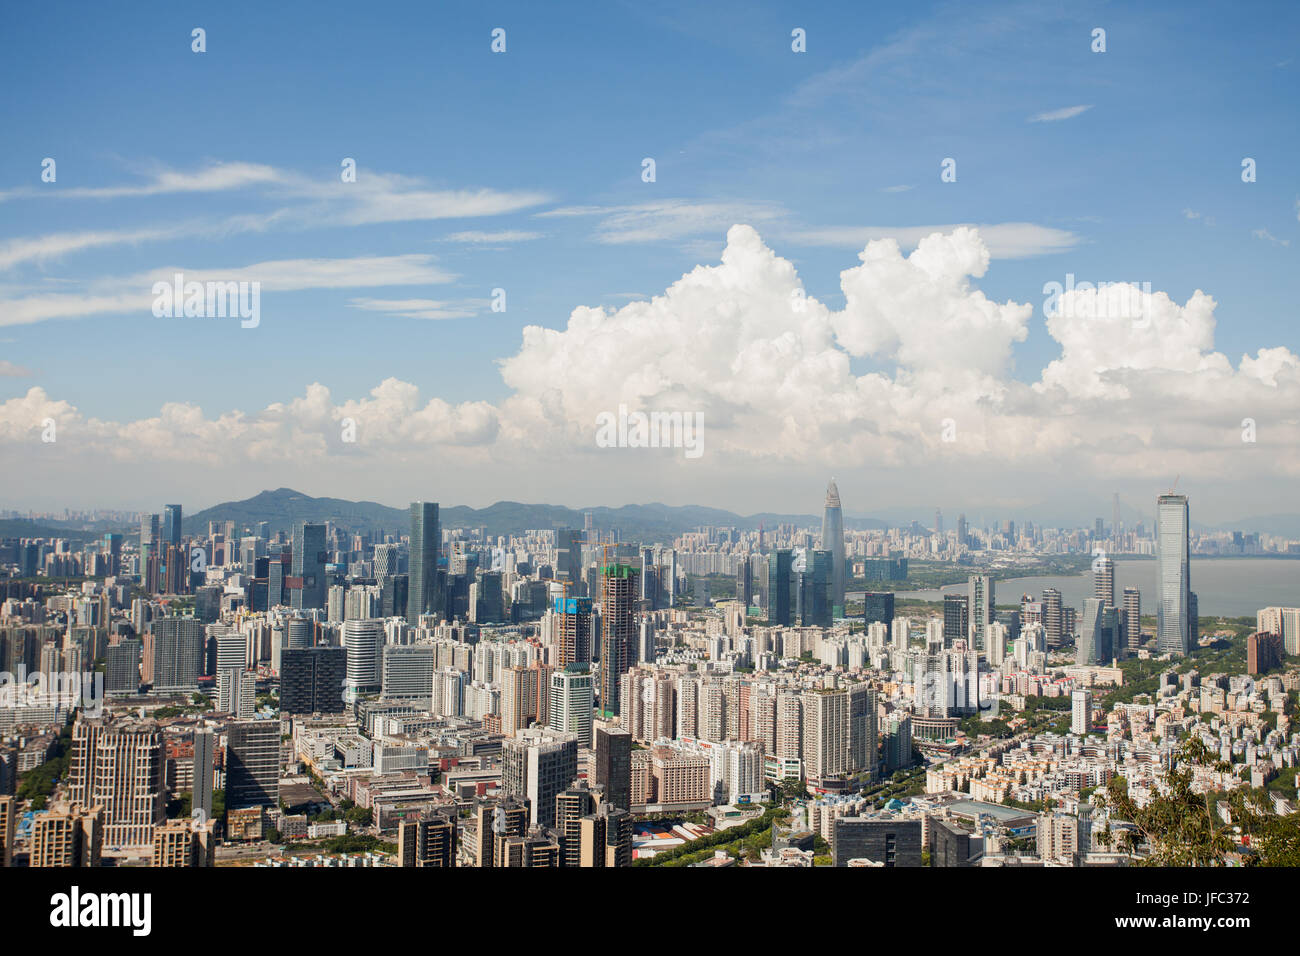 City Landscape; Skyscrapers, office and apartment buildings, Nanshan and Futian district, Shenzhen, Guangdong province, People's republic of China; Stock Photo